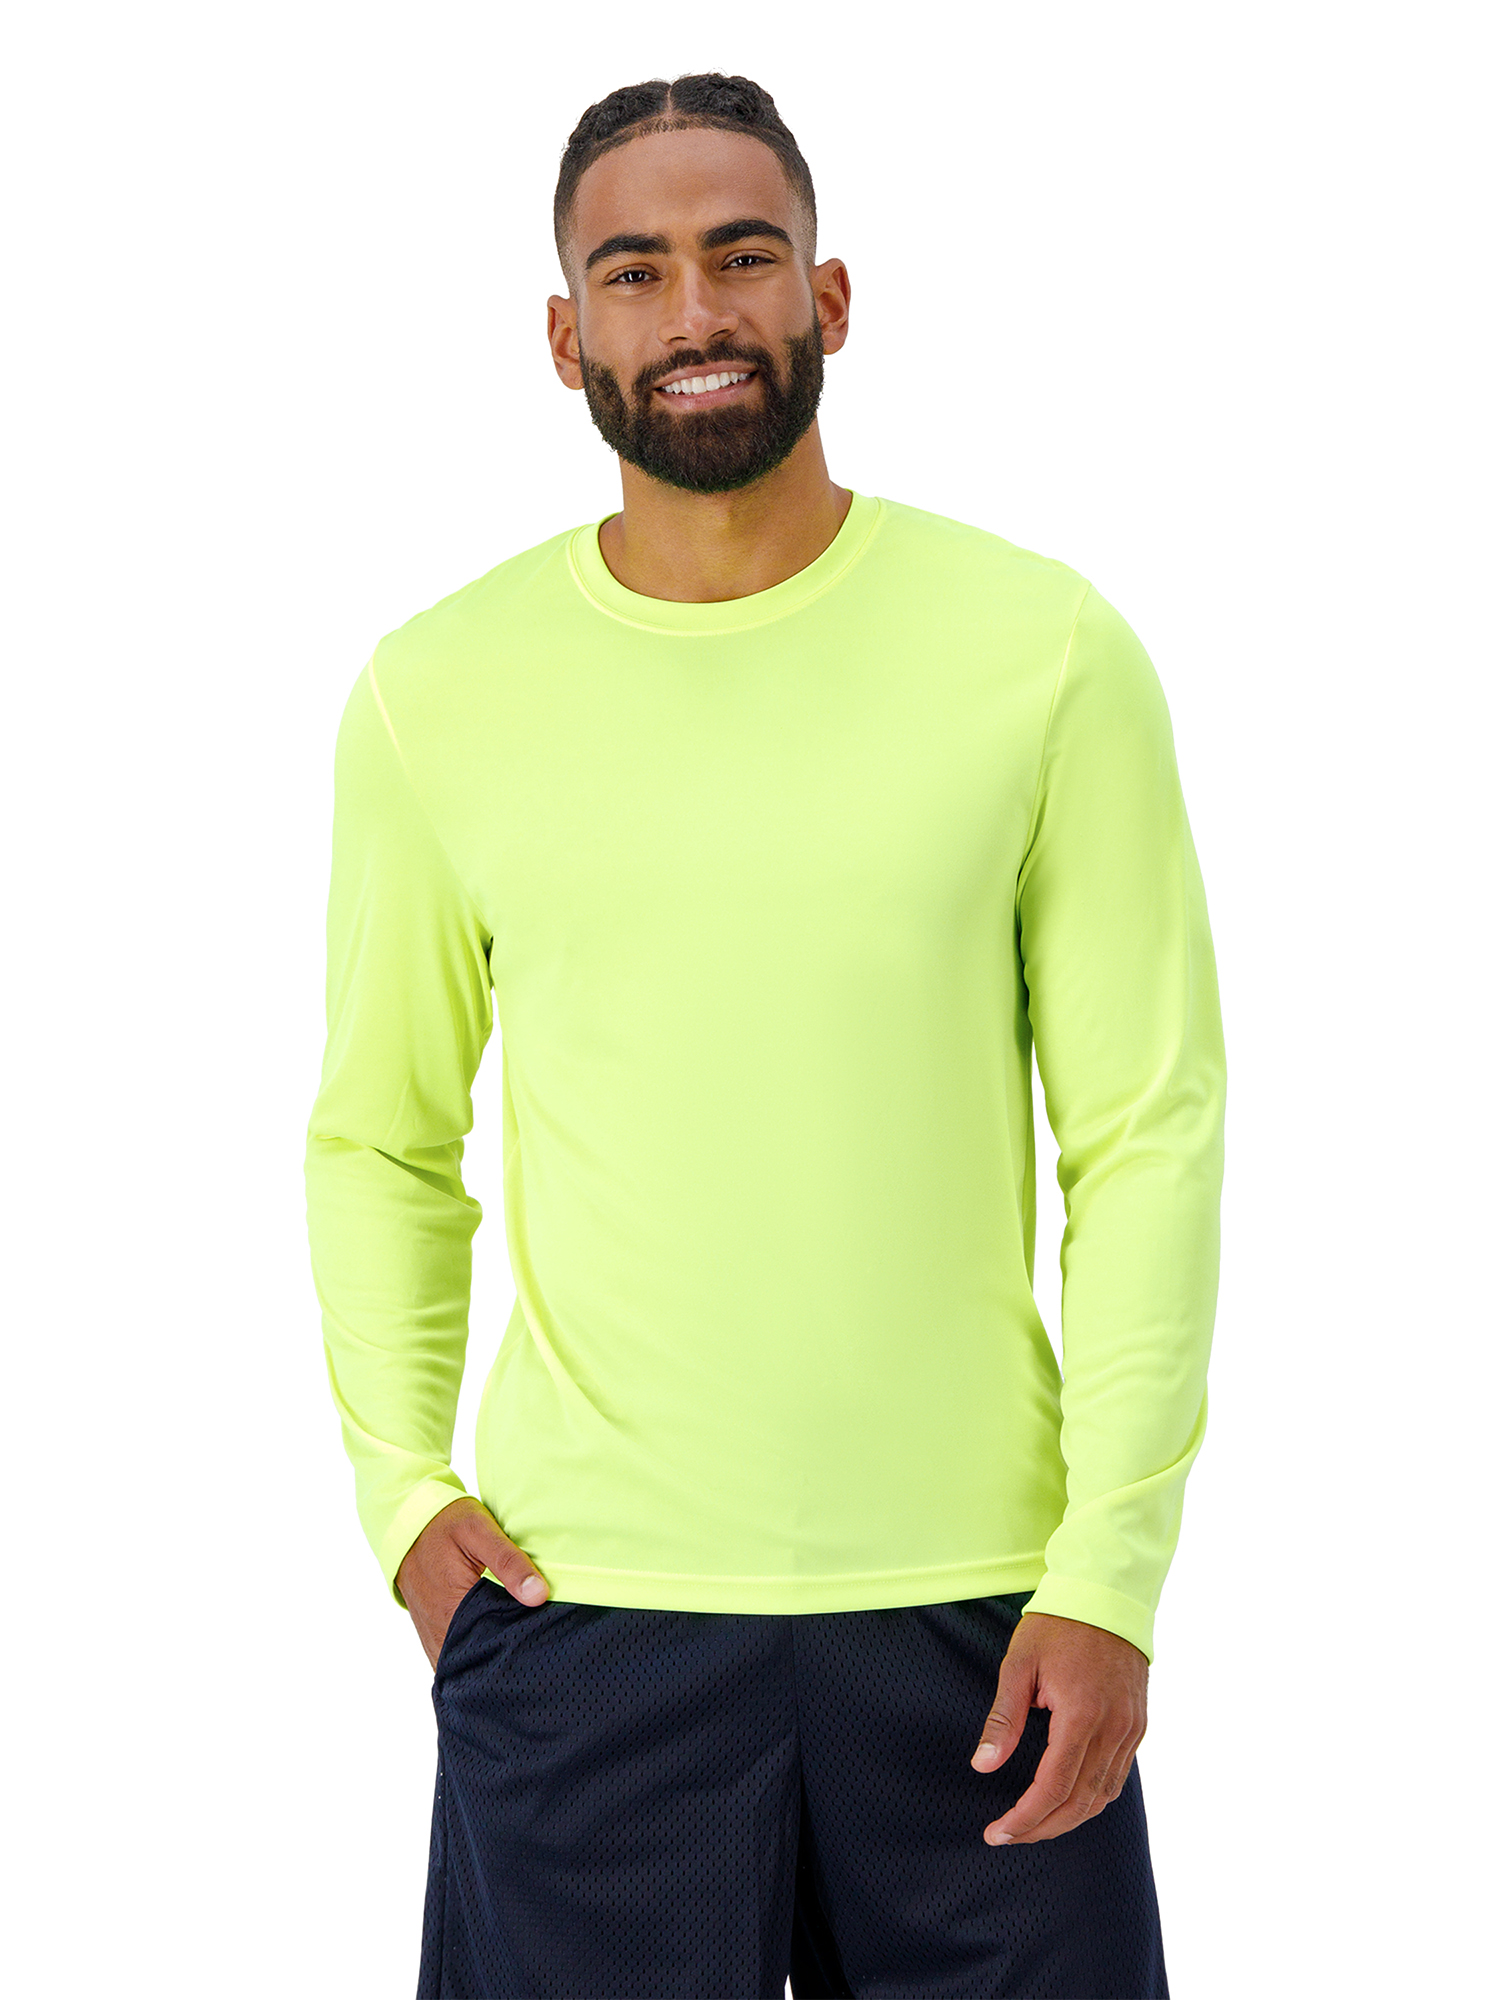 Hanes Men's and Big Men's Cool Dri Performance Long Sleeve T-Shirt (40+ UPF), Up to Size 3XL - image 1 of 8